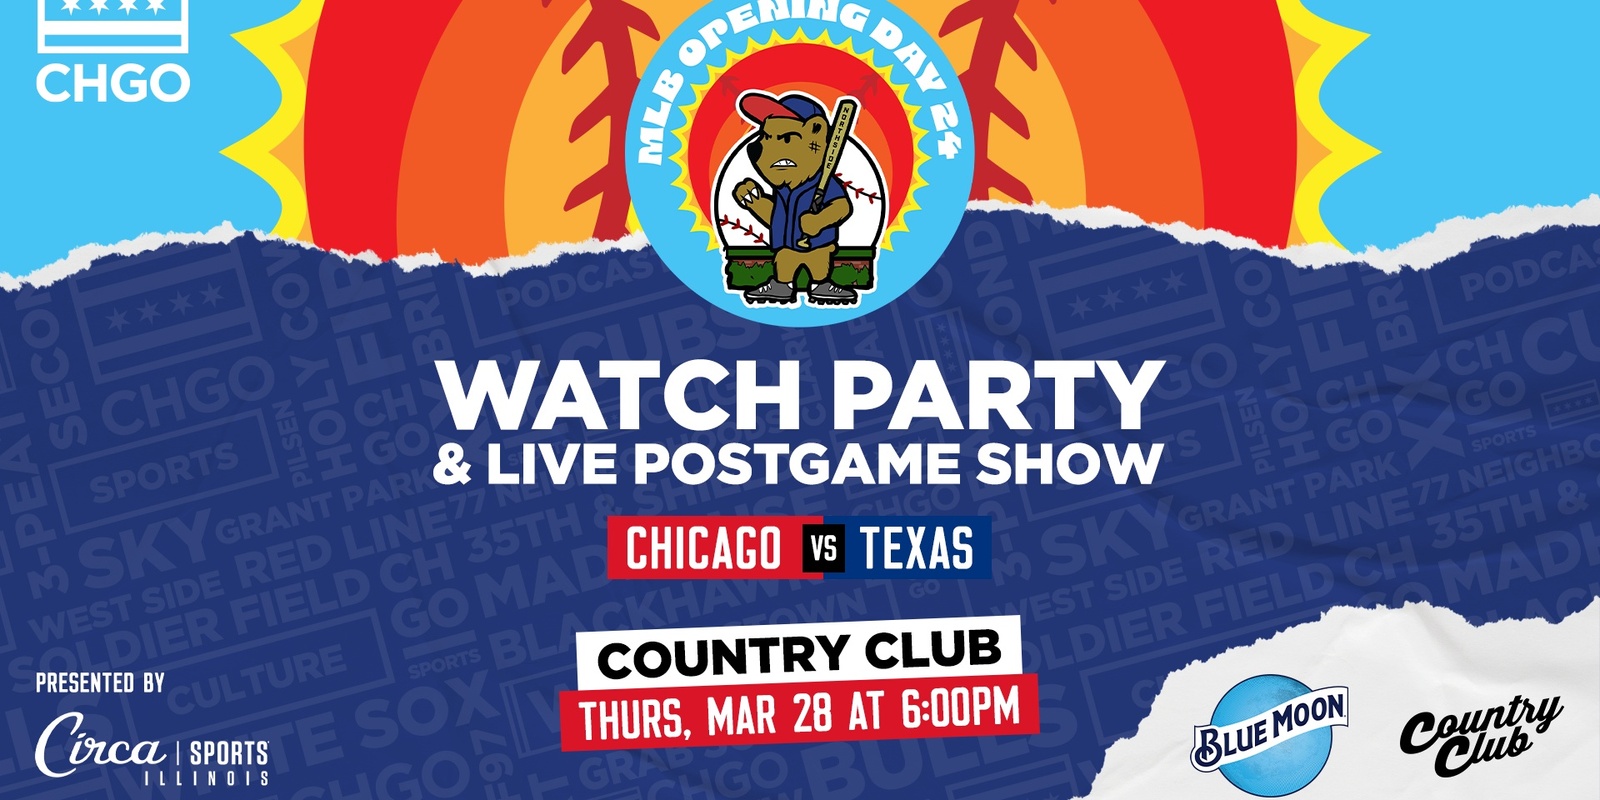 Banner image for CHGO Cubs Watch Party and Postgame Live Show at The Country Club